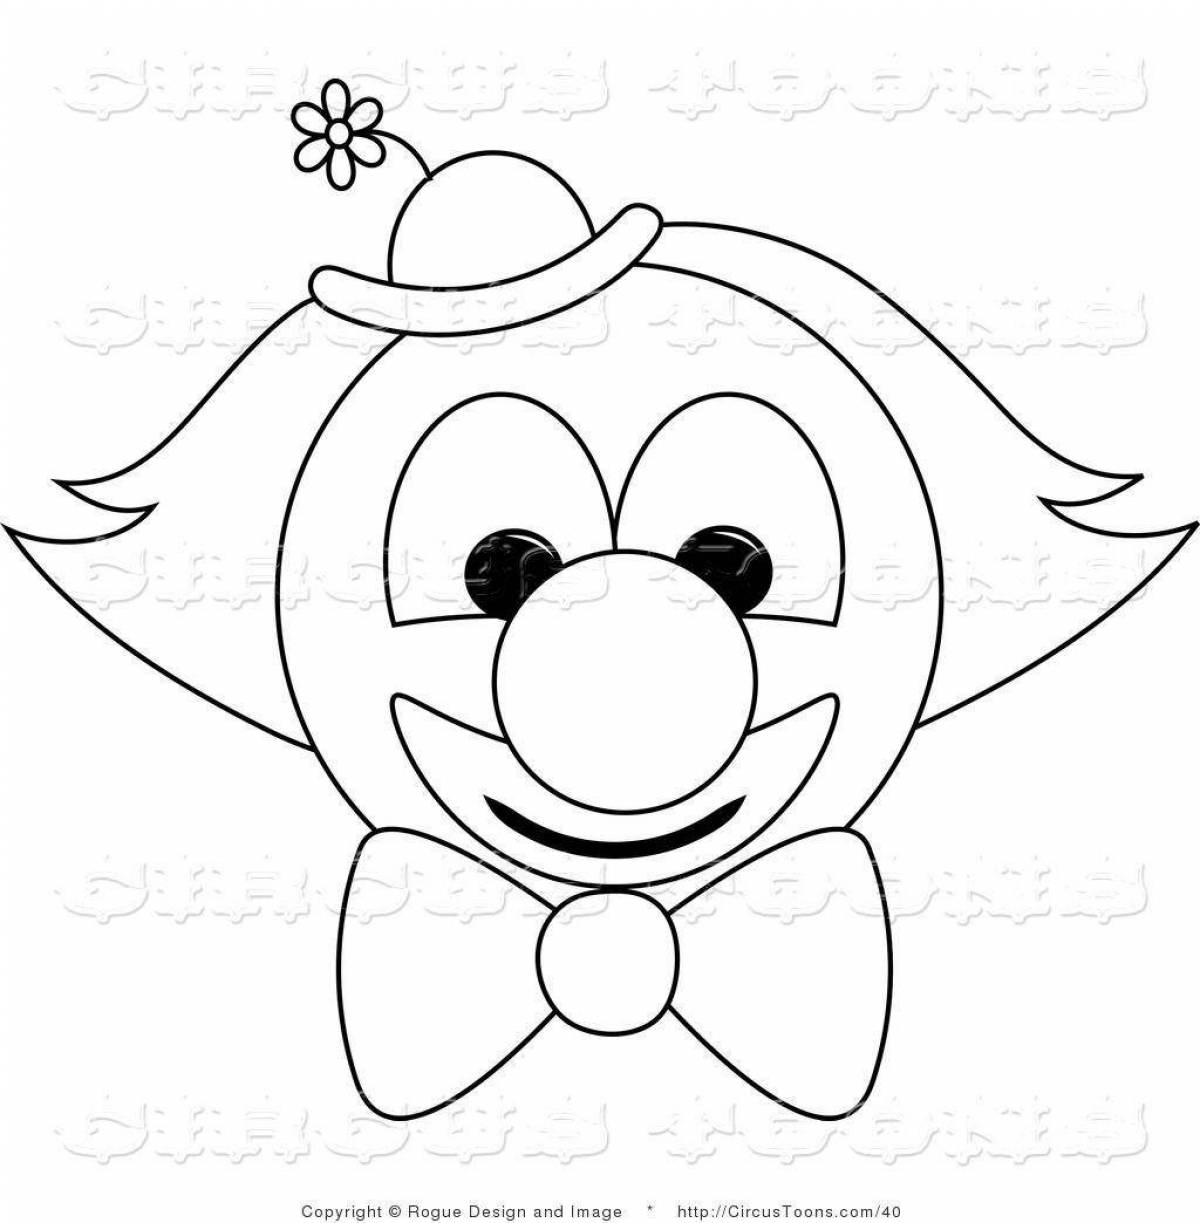 Amazing clown face coloring page